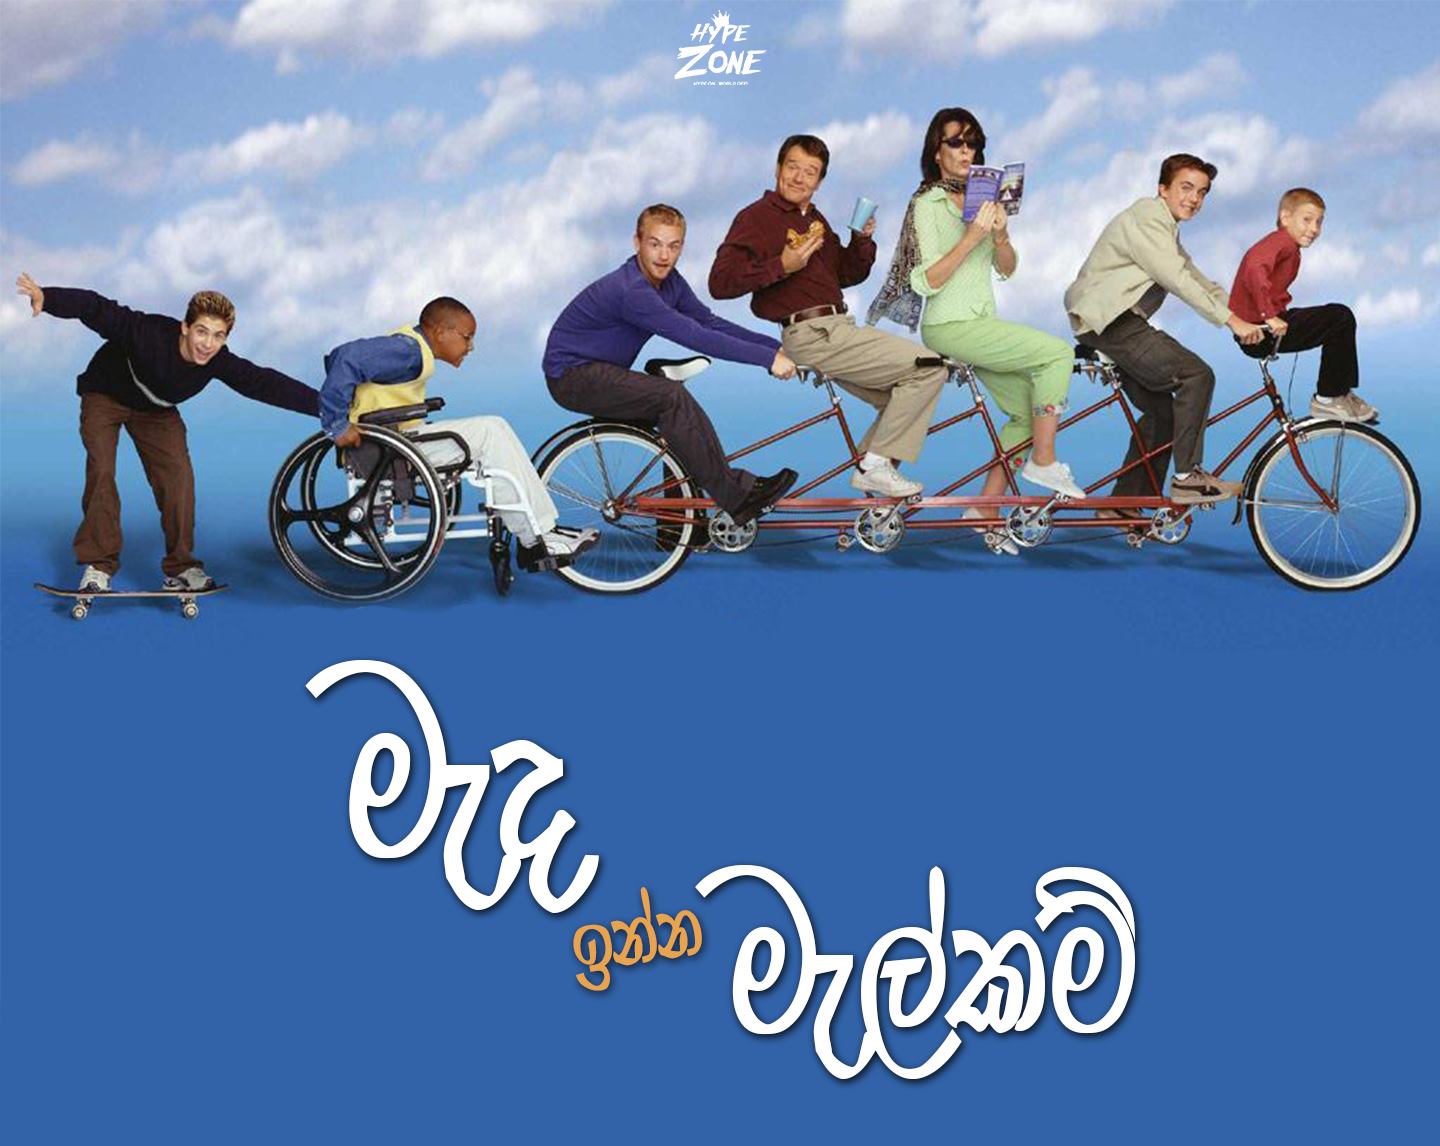 You are currently viewing මැද ඉන්න මැල්කම්: Malcolm In The Middle Intro.